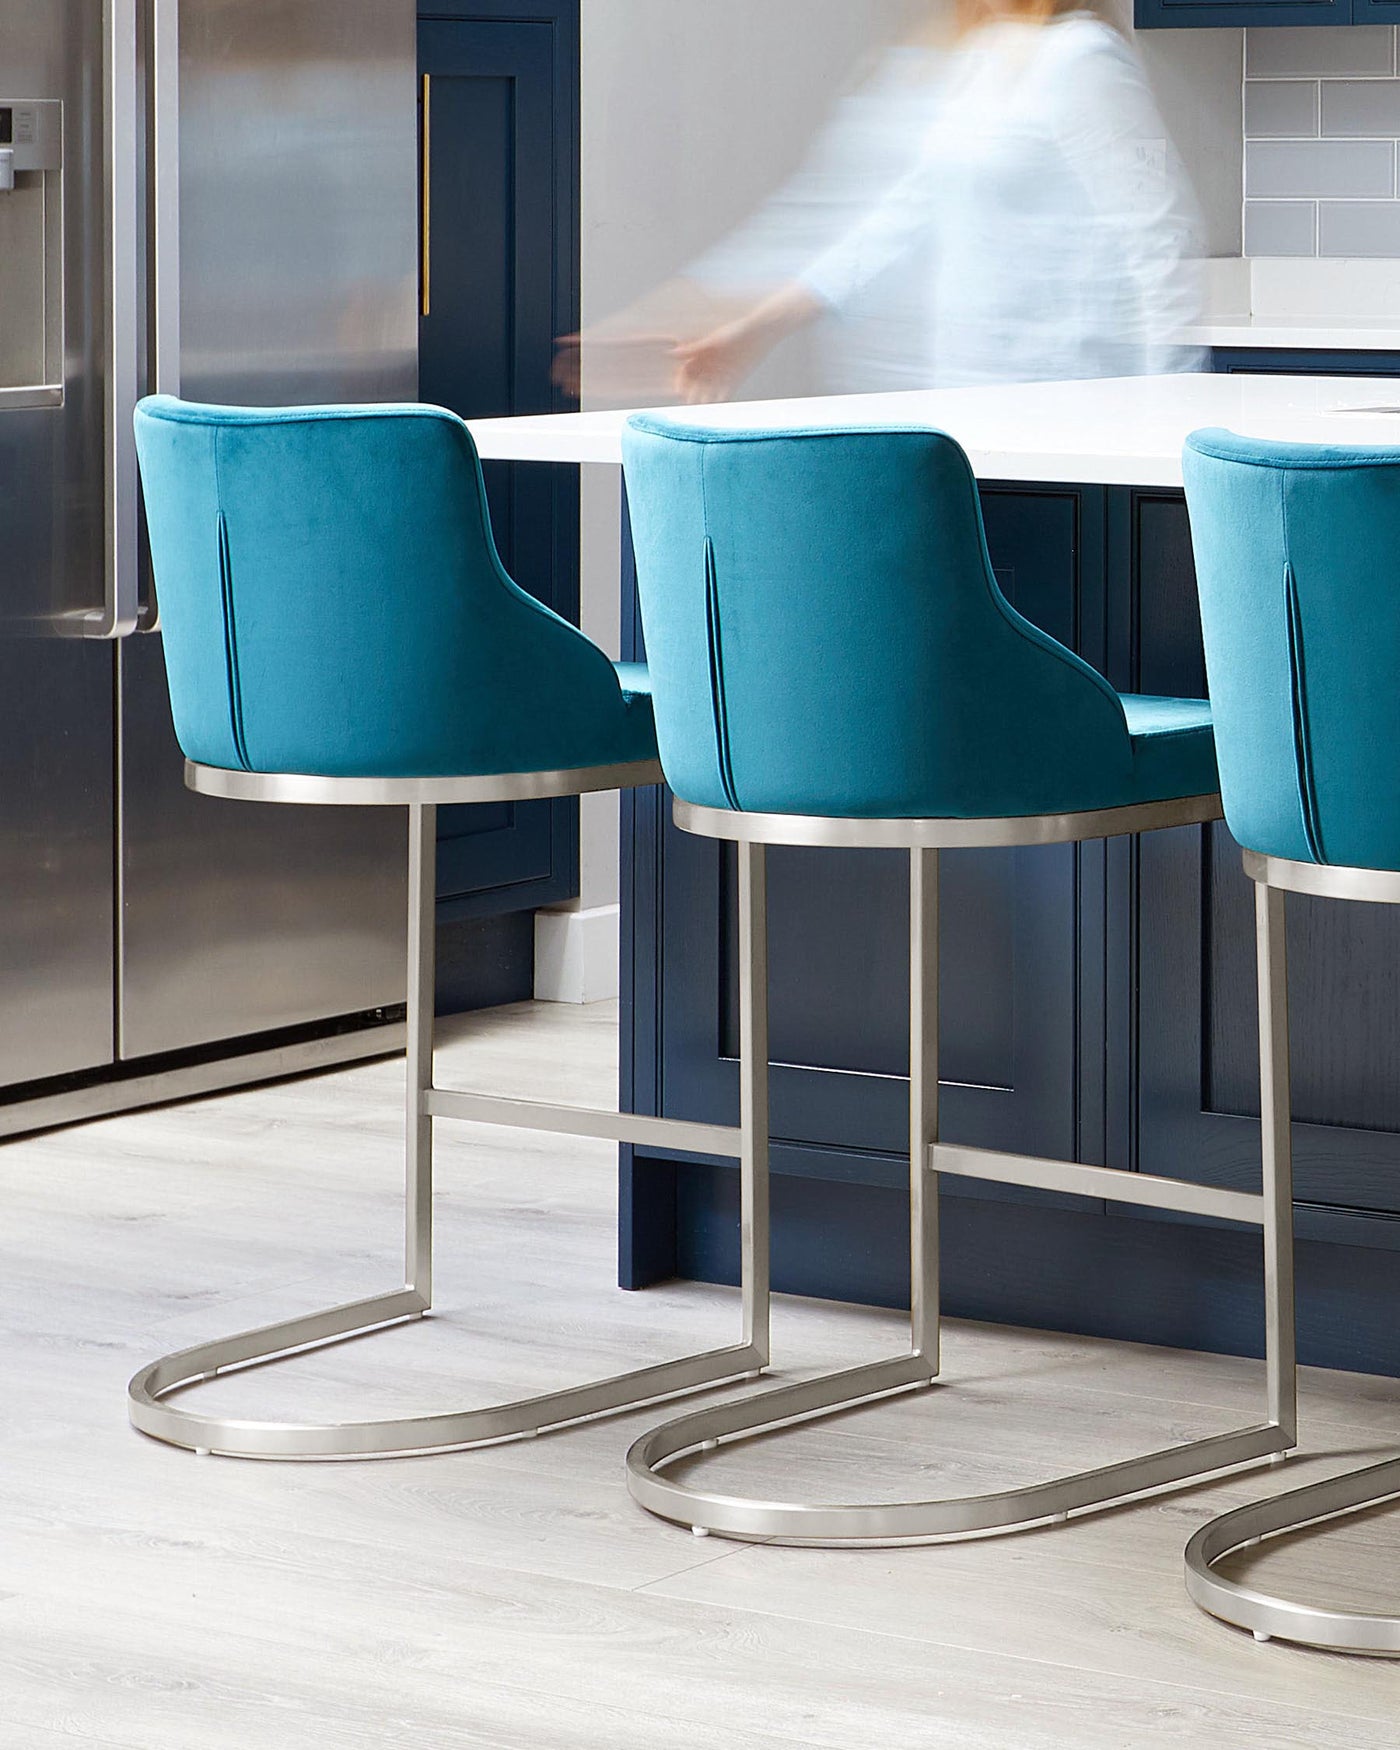 Teal blue upholstered bar chairs with a sleek curved back design and vertical stitching detail. The chairs feature a silver metal base with flat rounded legs and a circular footrest. The furniture is set against a kitchen island with a white countertop.